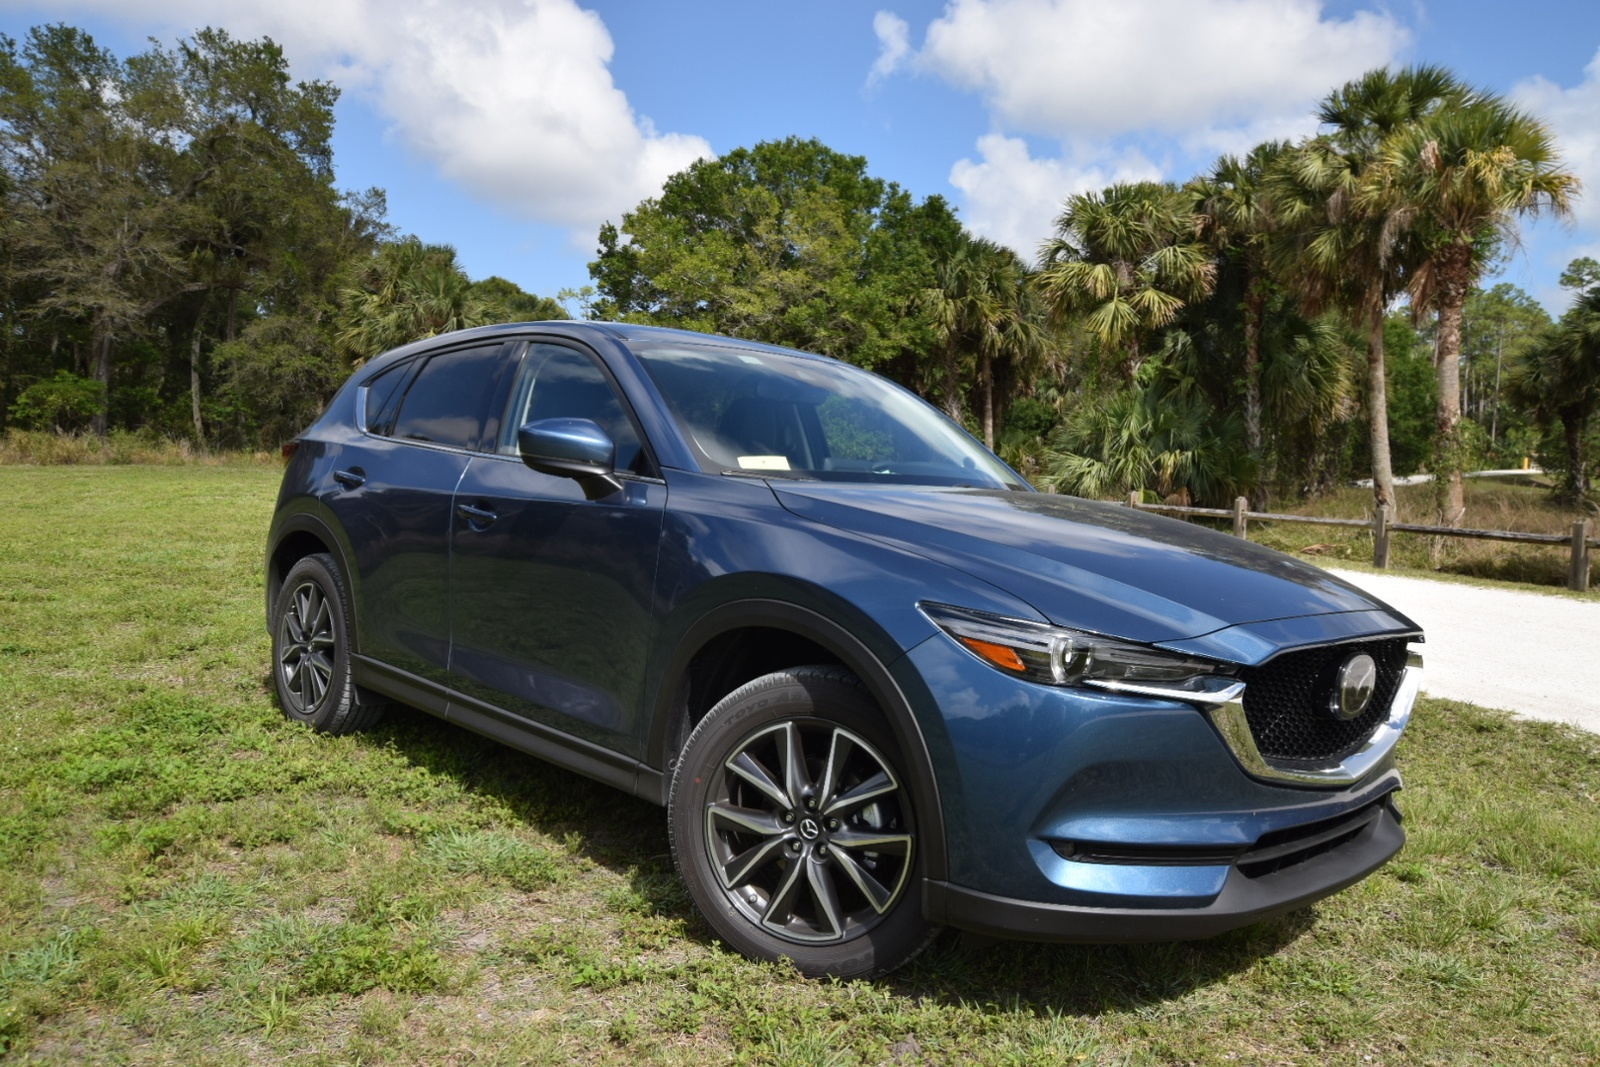 2017 Mazda CX-5 If It’s Not Broke Make It Even Better Cover